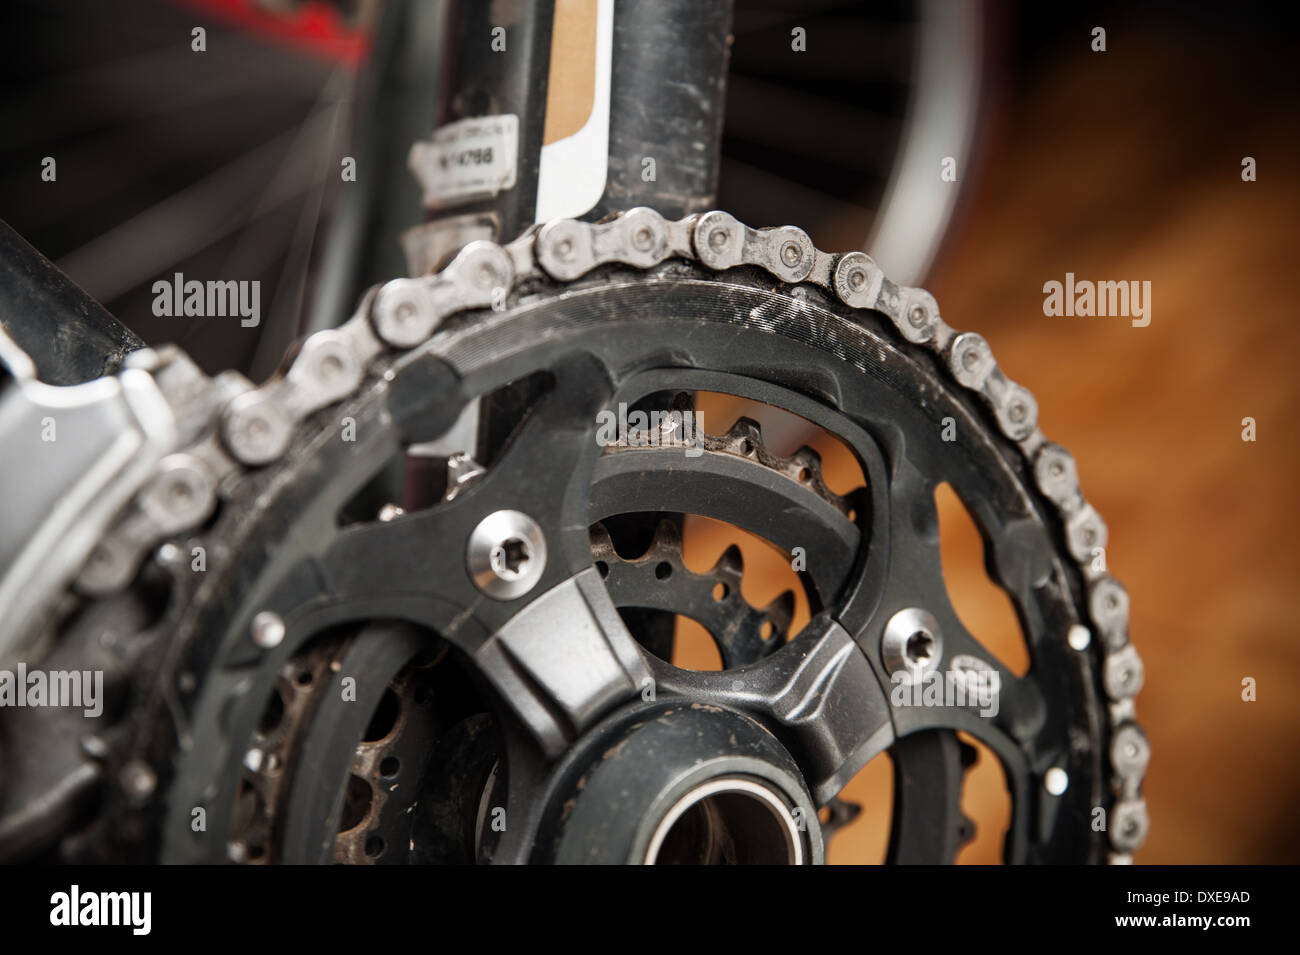 parts of a gear bike